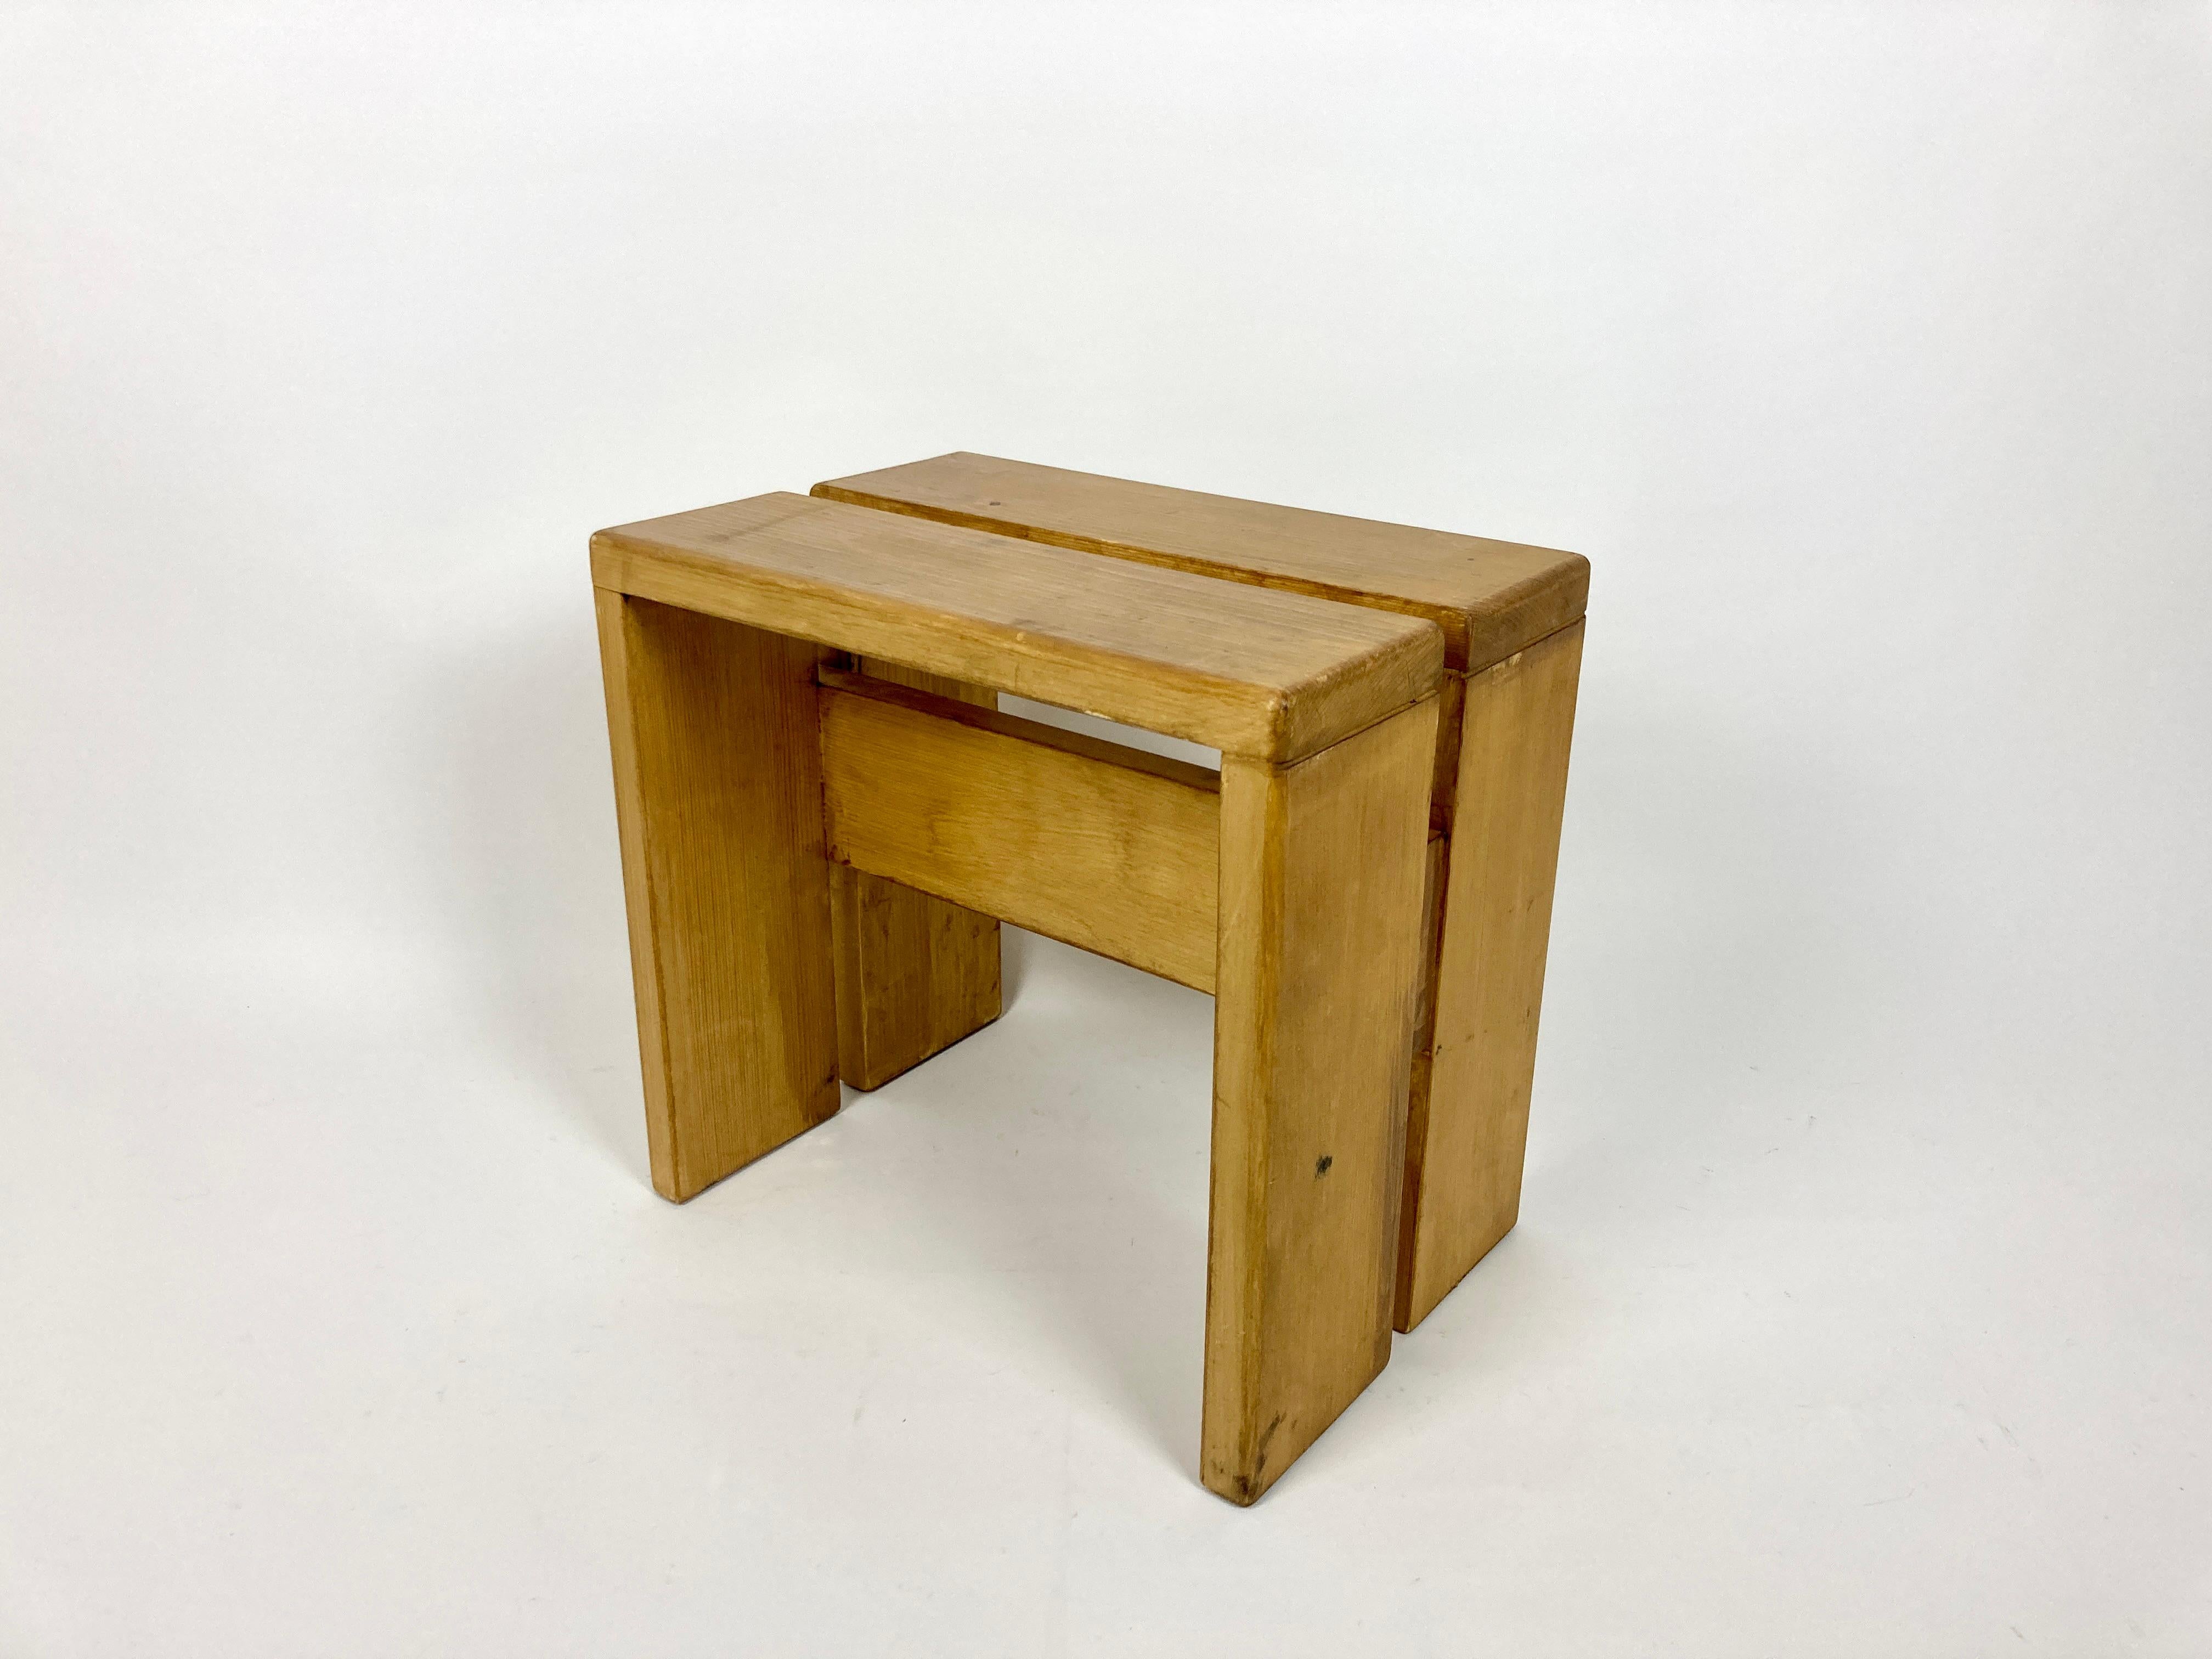 Pine Stools/Side Table from Les Arcs, France 1970s, Charlotte Perriand